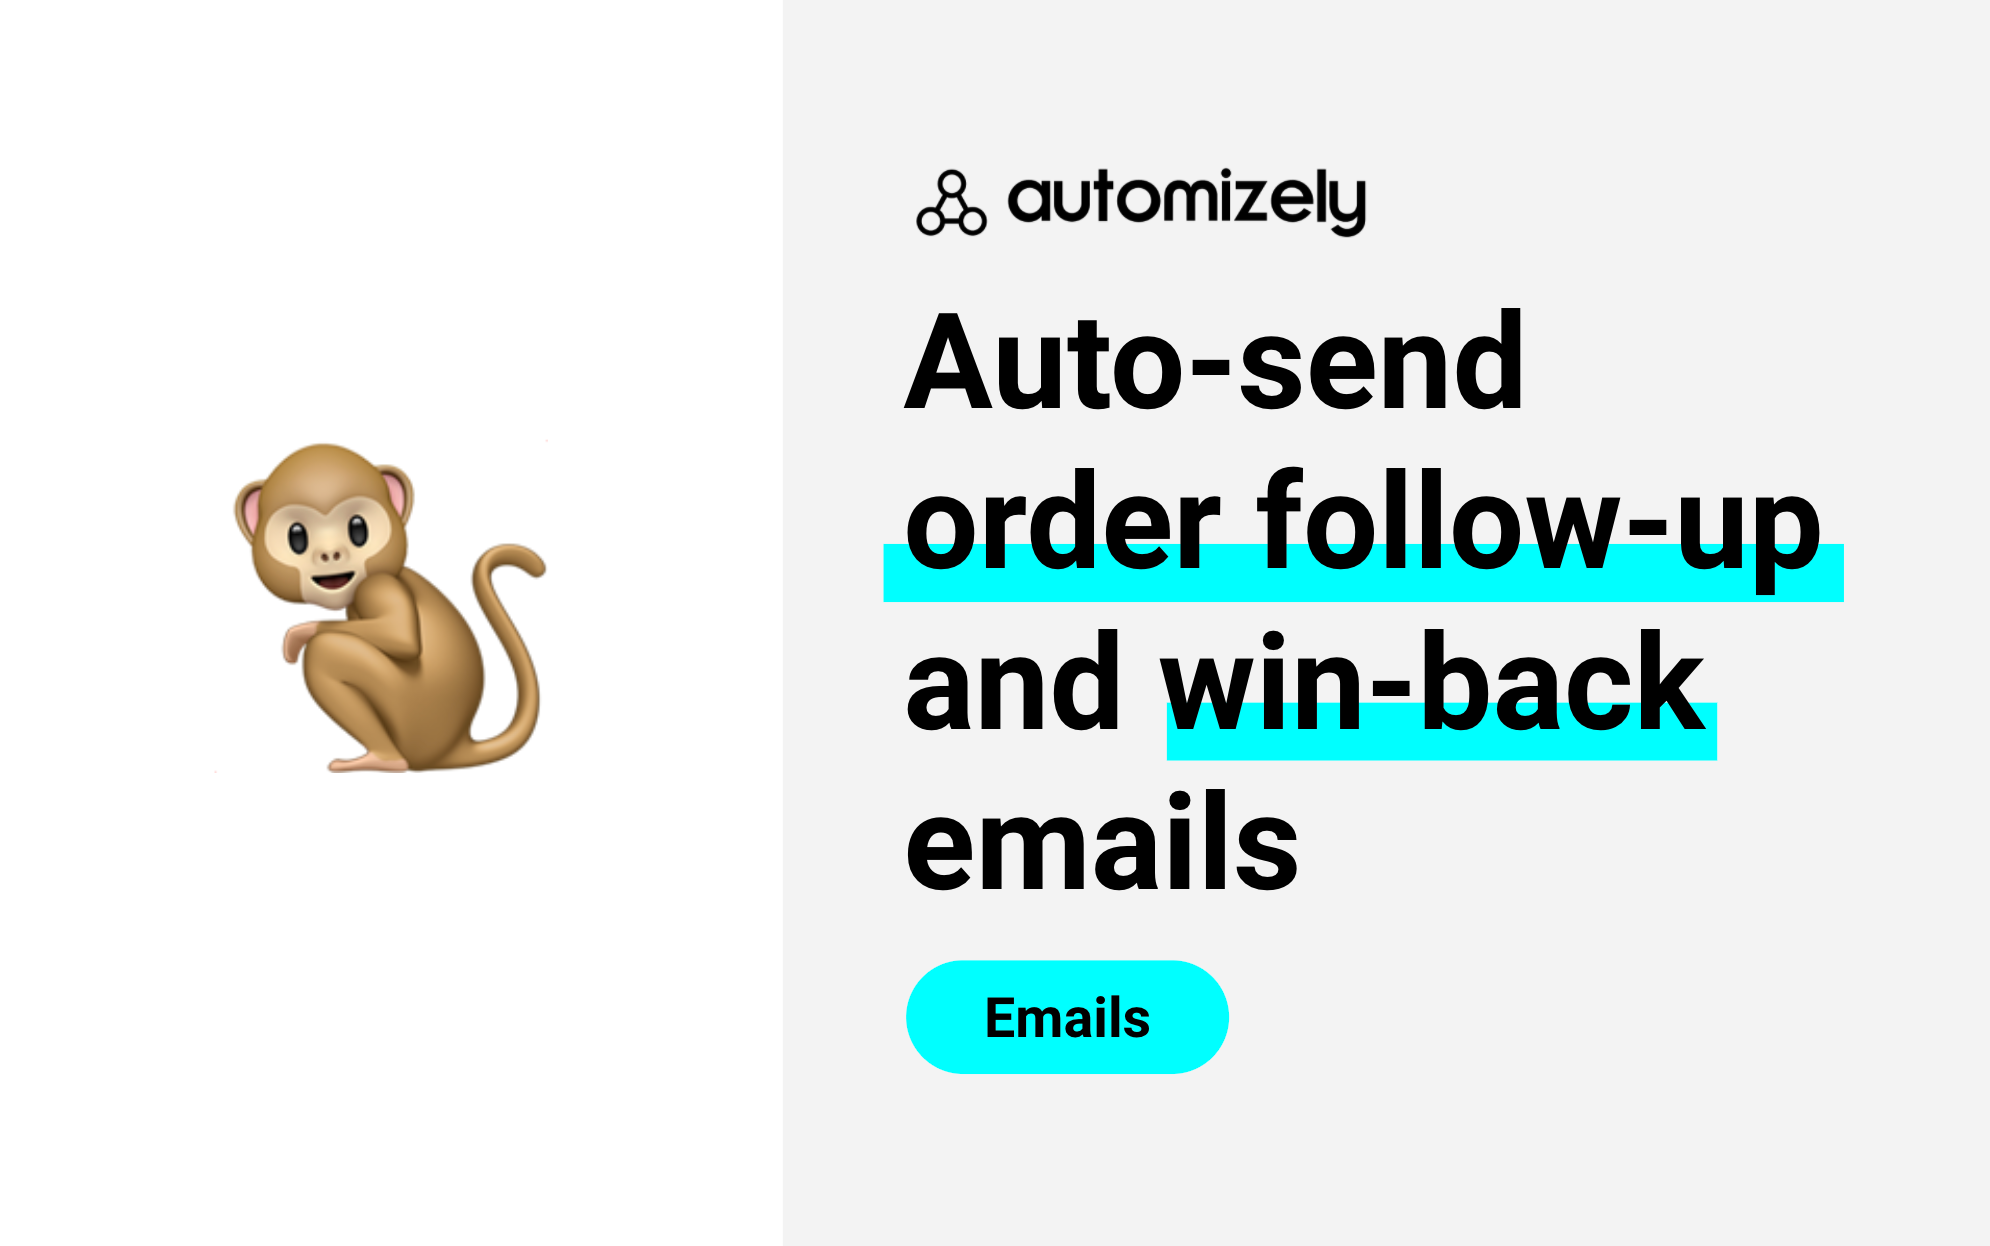 Boost customer retention with Automizely order follow-up emails